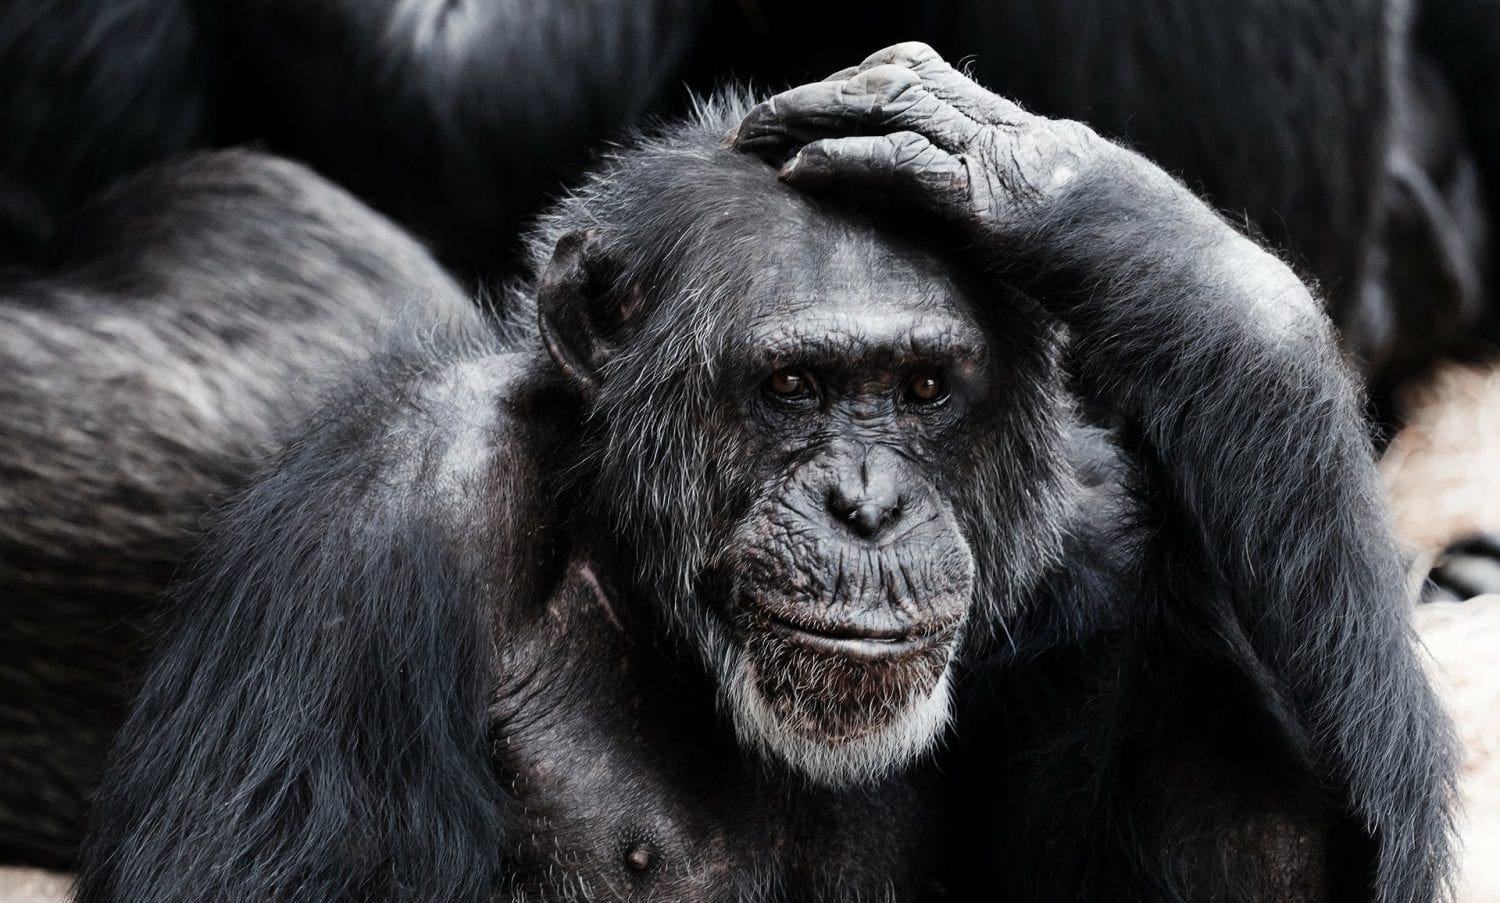 I do not think too deep. Ape scratching his head